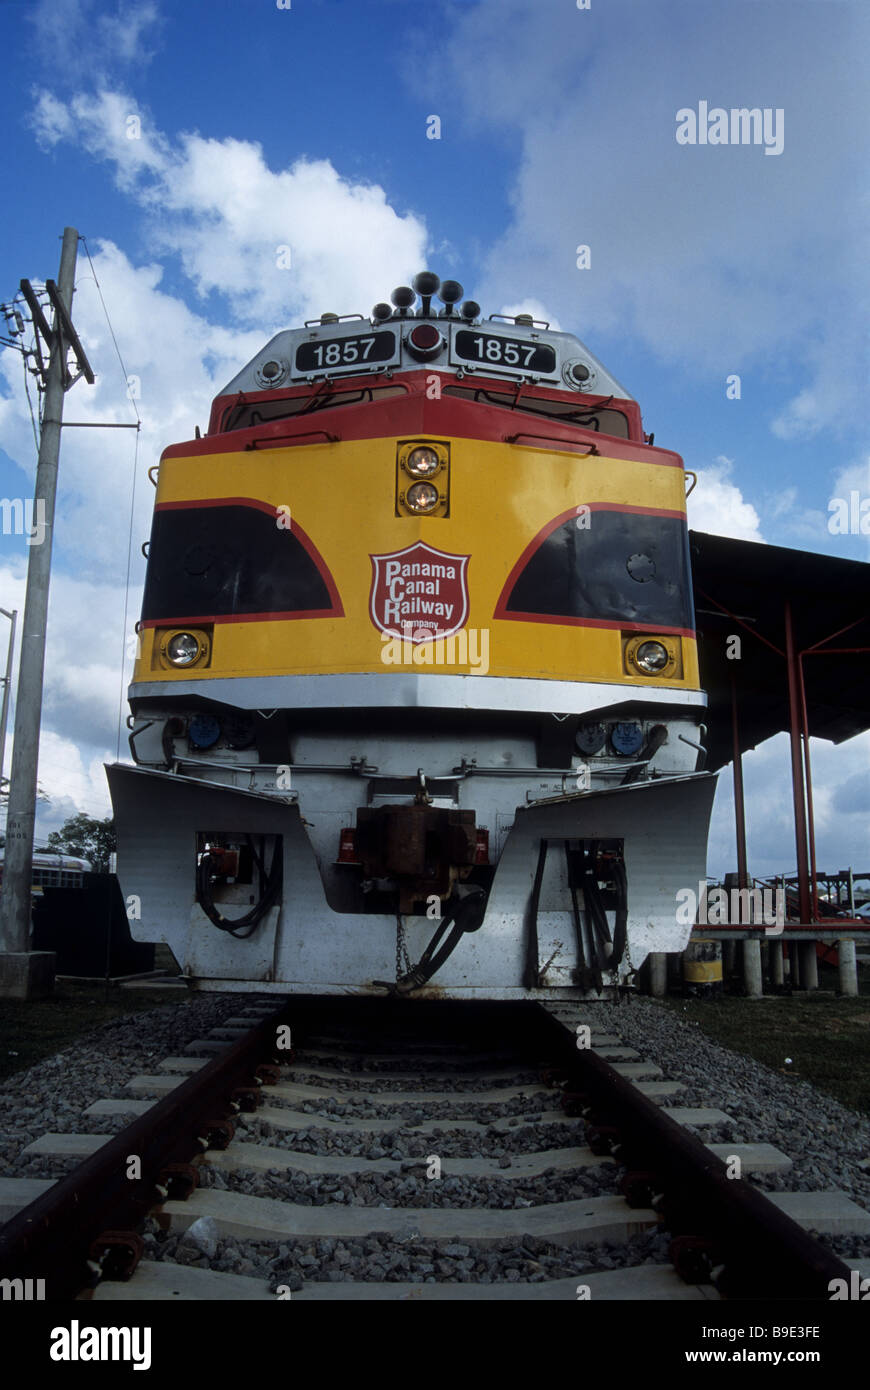 Diesel engine owned by Panama Canal Railway Company at Colon, Panama Stock Photo